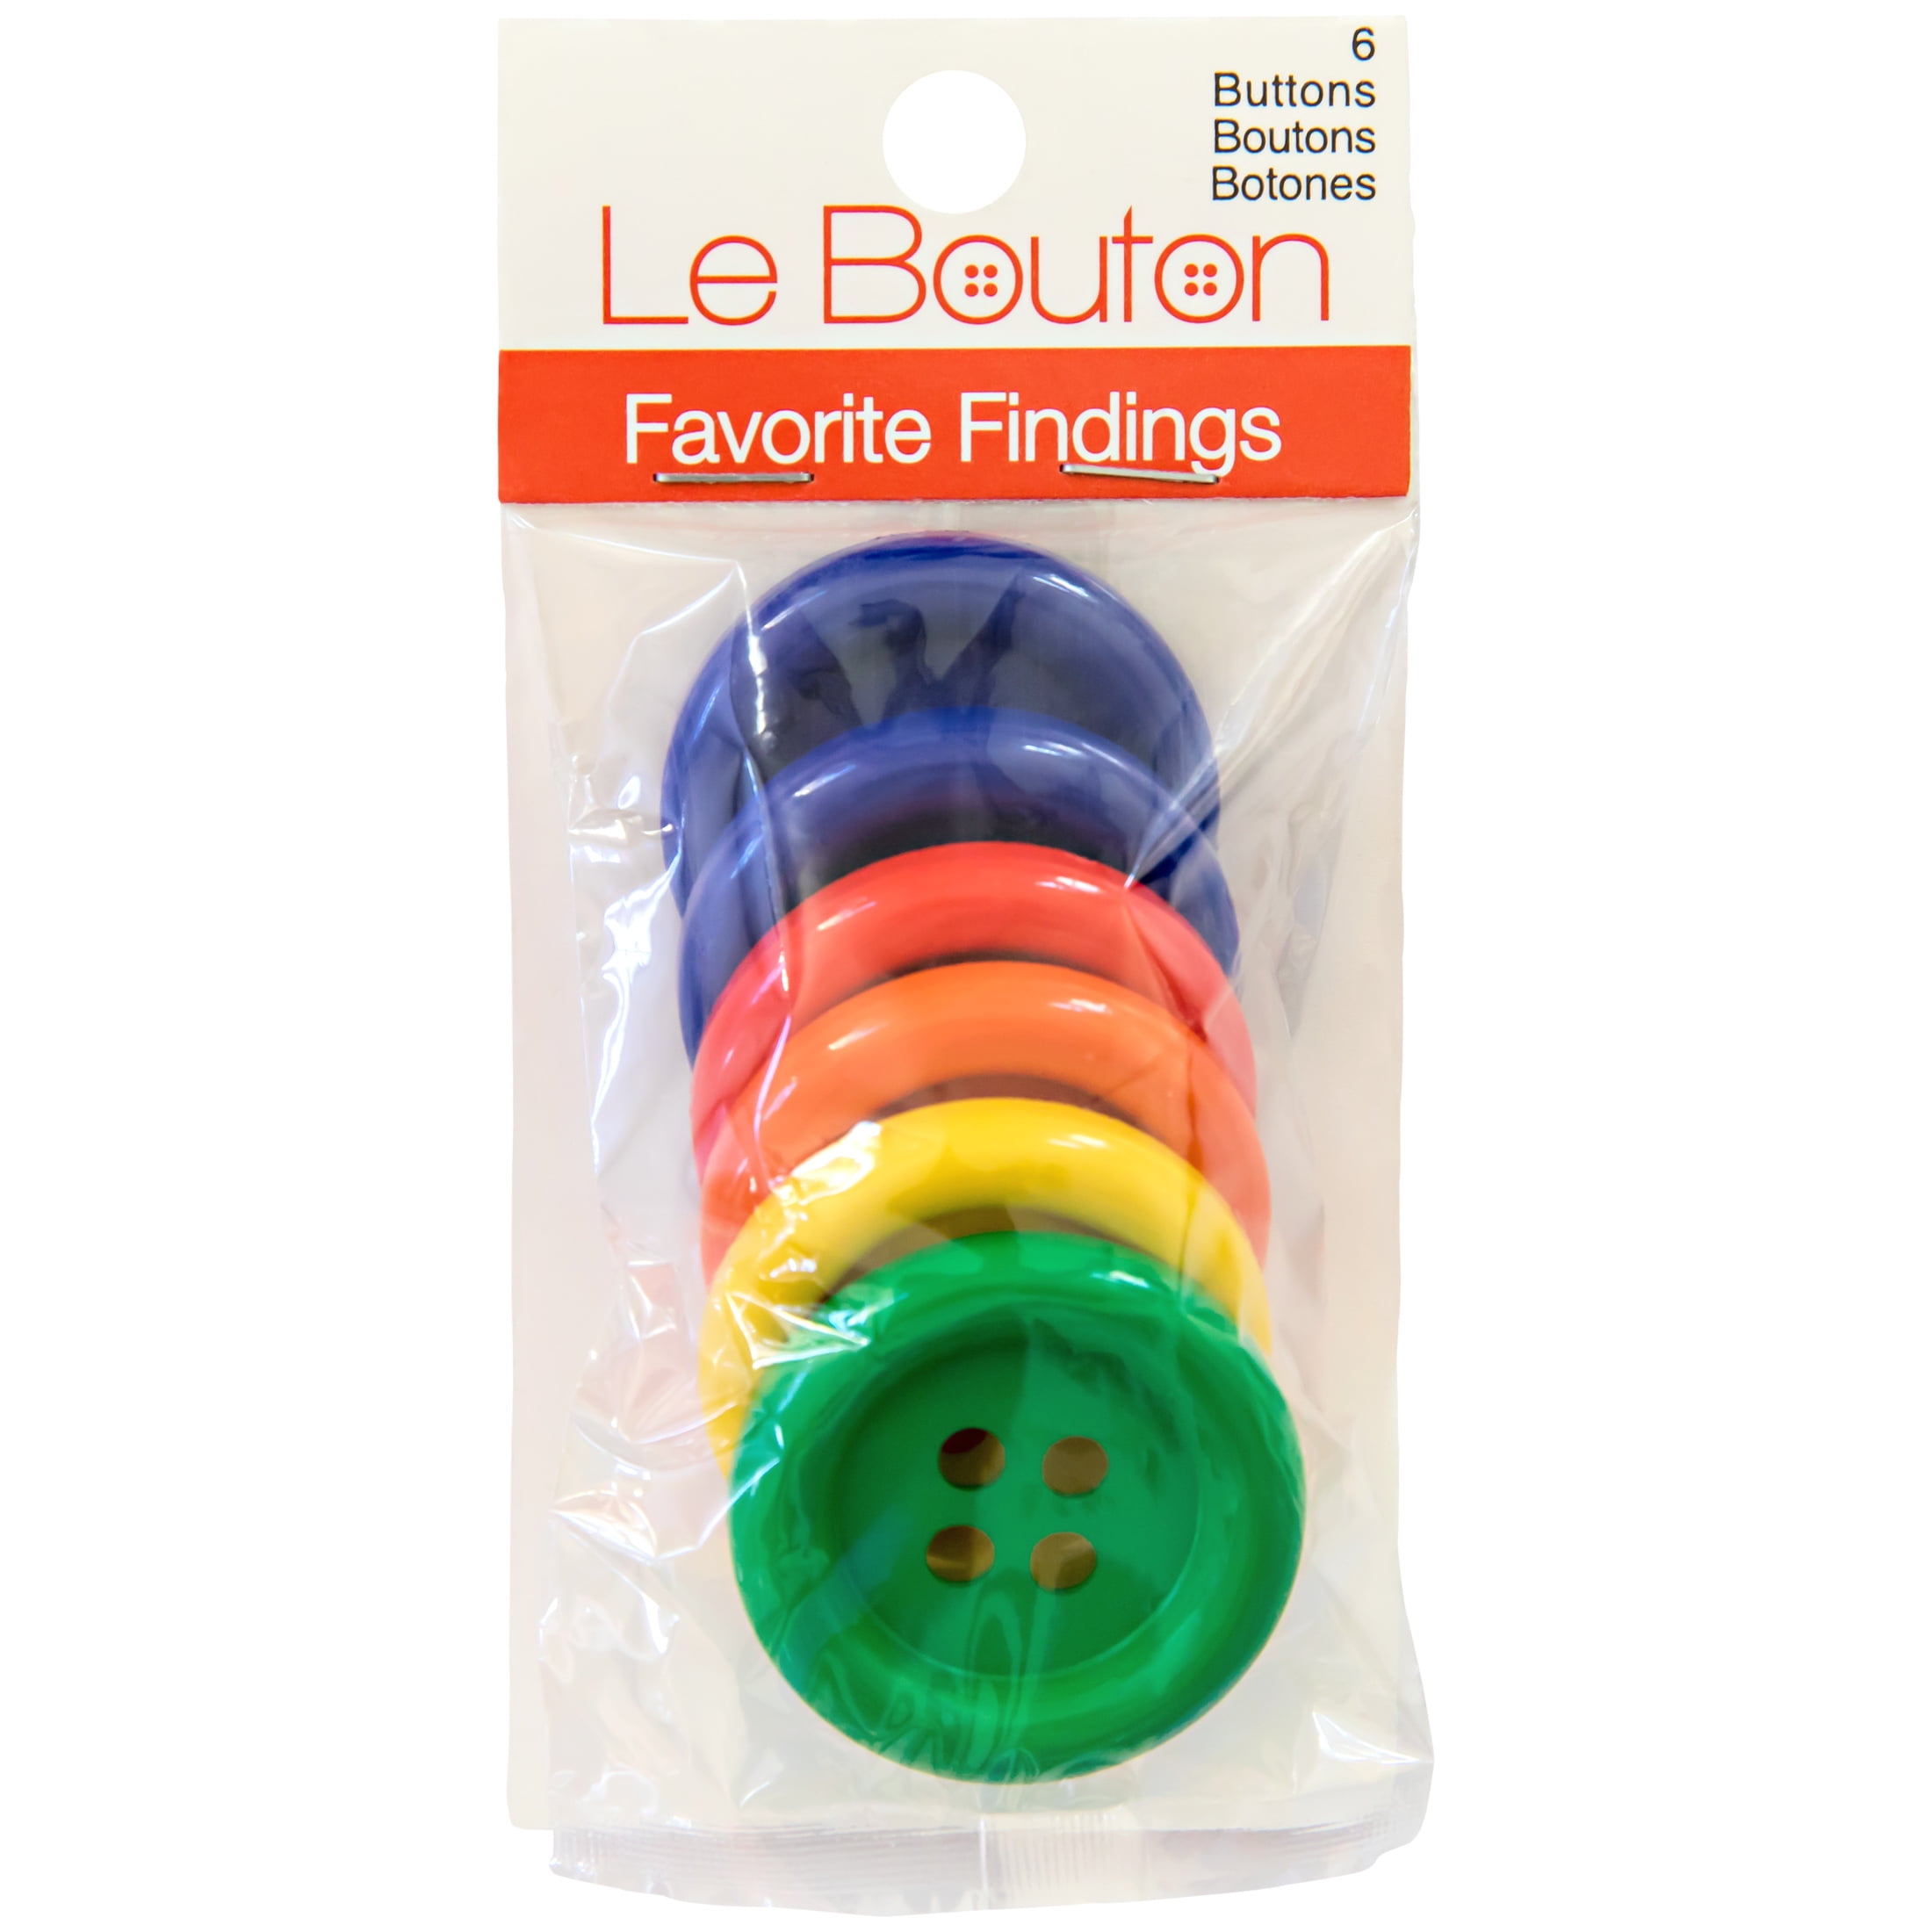 Favorite Findings Primary 1 3/8" 4-Hole Big Buttons, 6 Pieces